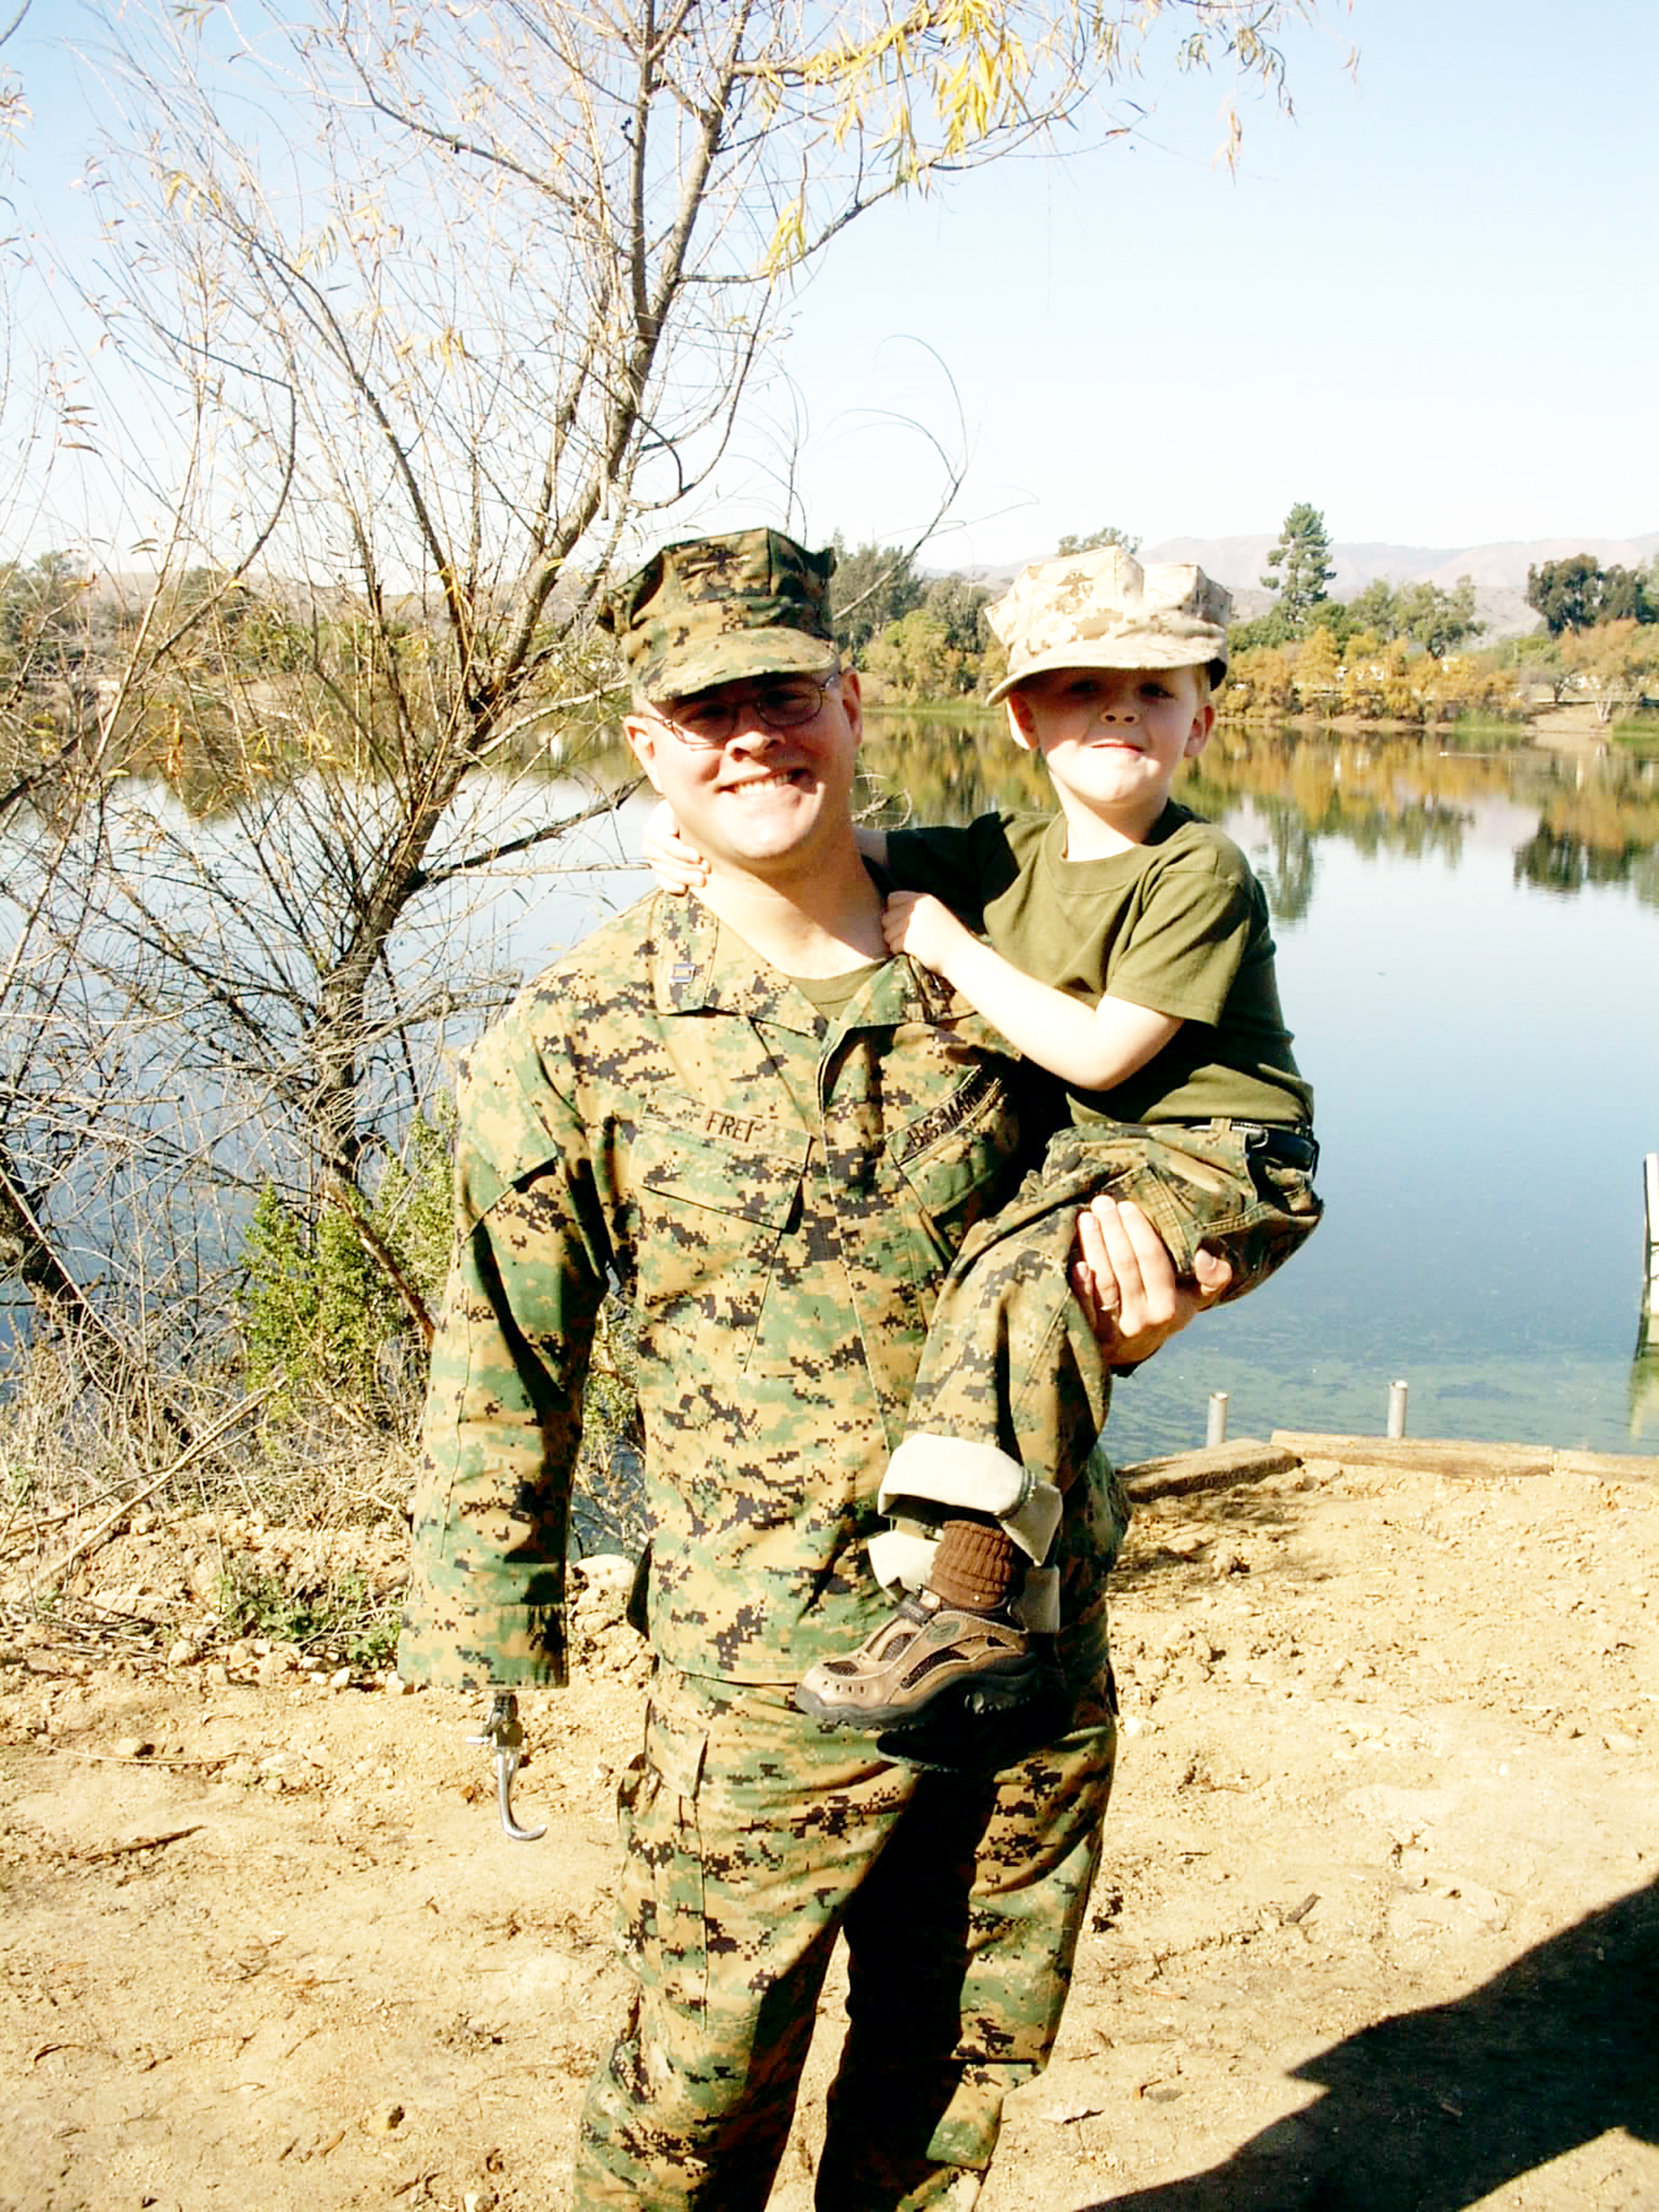 PHOTO:  Robbie Frei is seen with his father, Jason Frei, in this undated photo. Robbie Frei was 3 years old in 2003, when Jason Frei, a major in the Marine Corps, was injured during the invasion of Iraq. Jason Frei lost his right arm and hand.